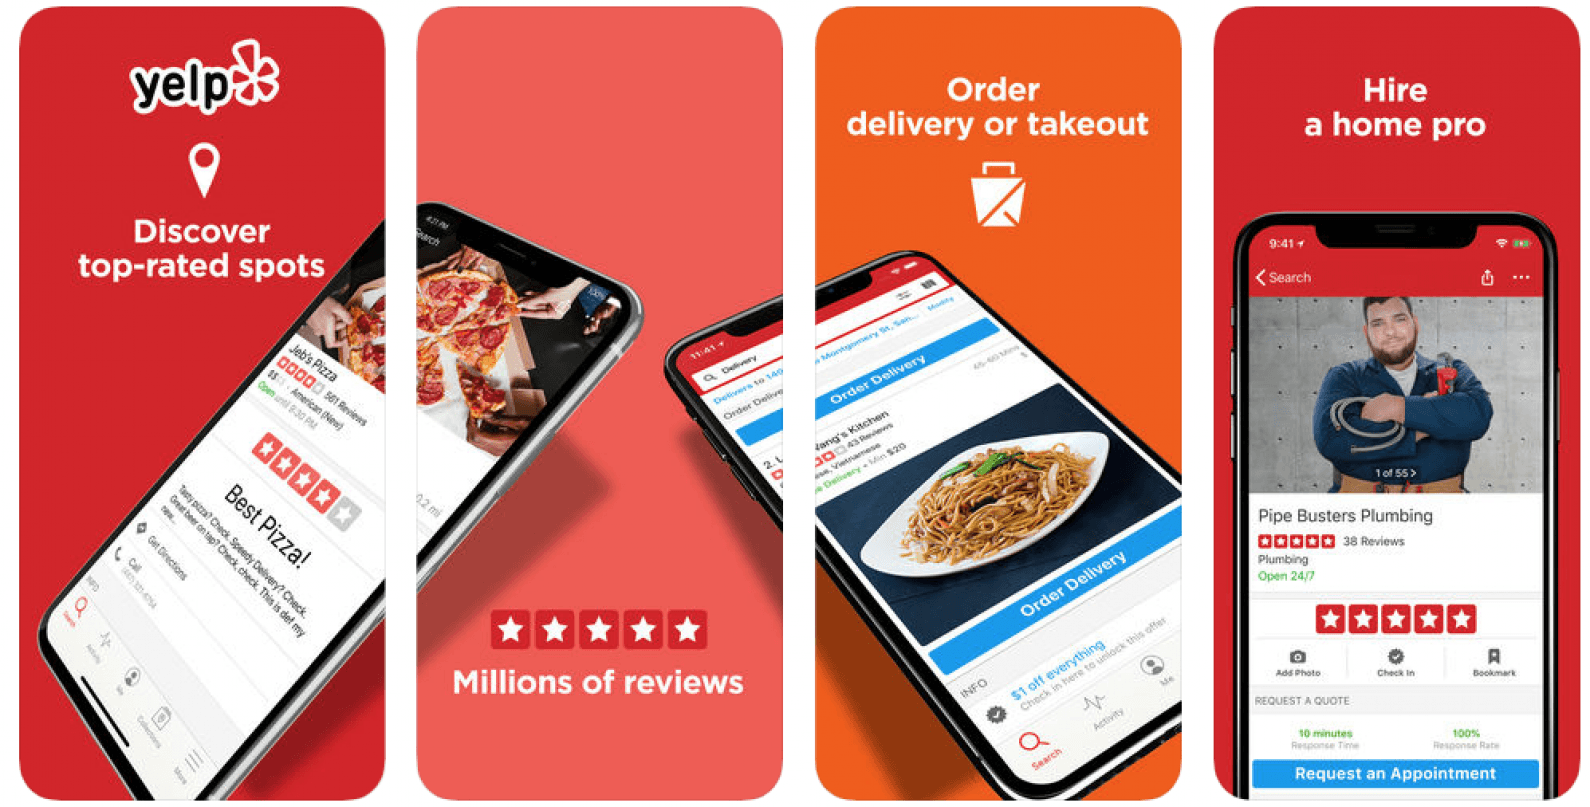 Yelp App - Find Reviews for Everything